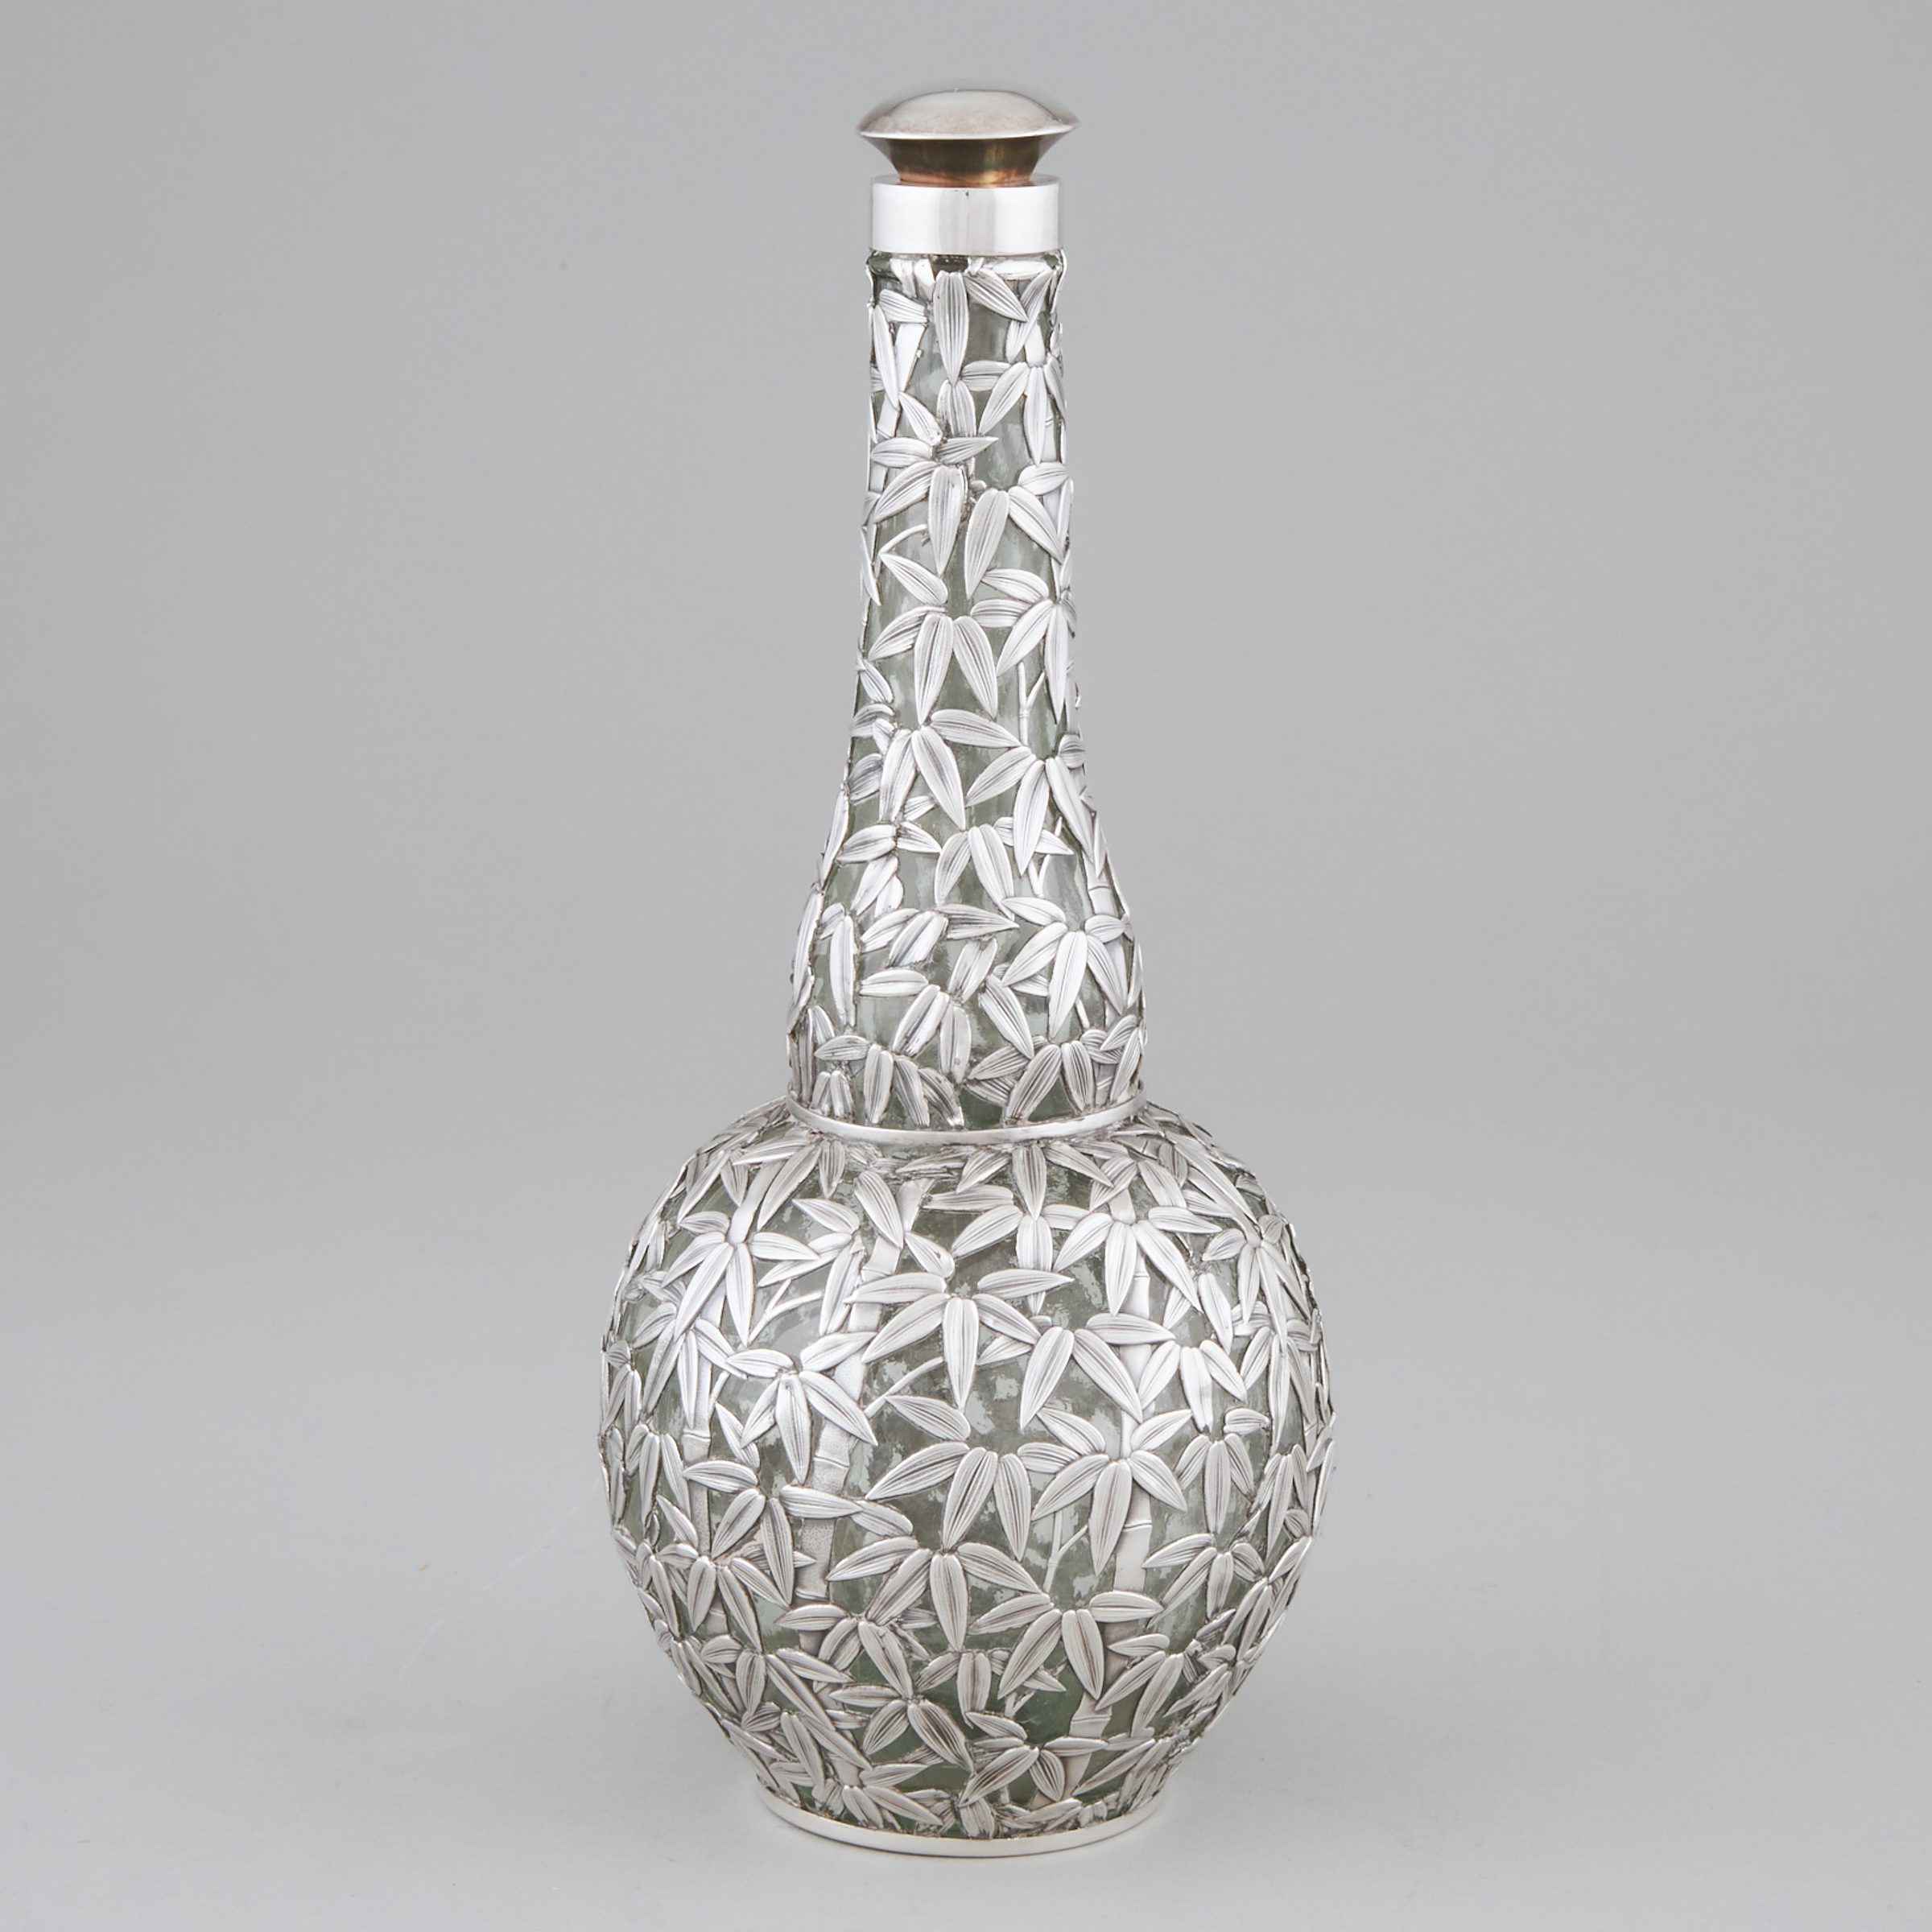 Chinese Silver Overlaid Glass Bottle Decanter, c.1900